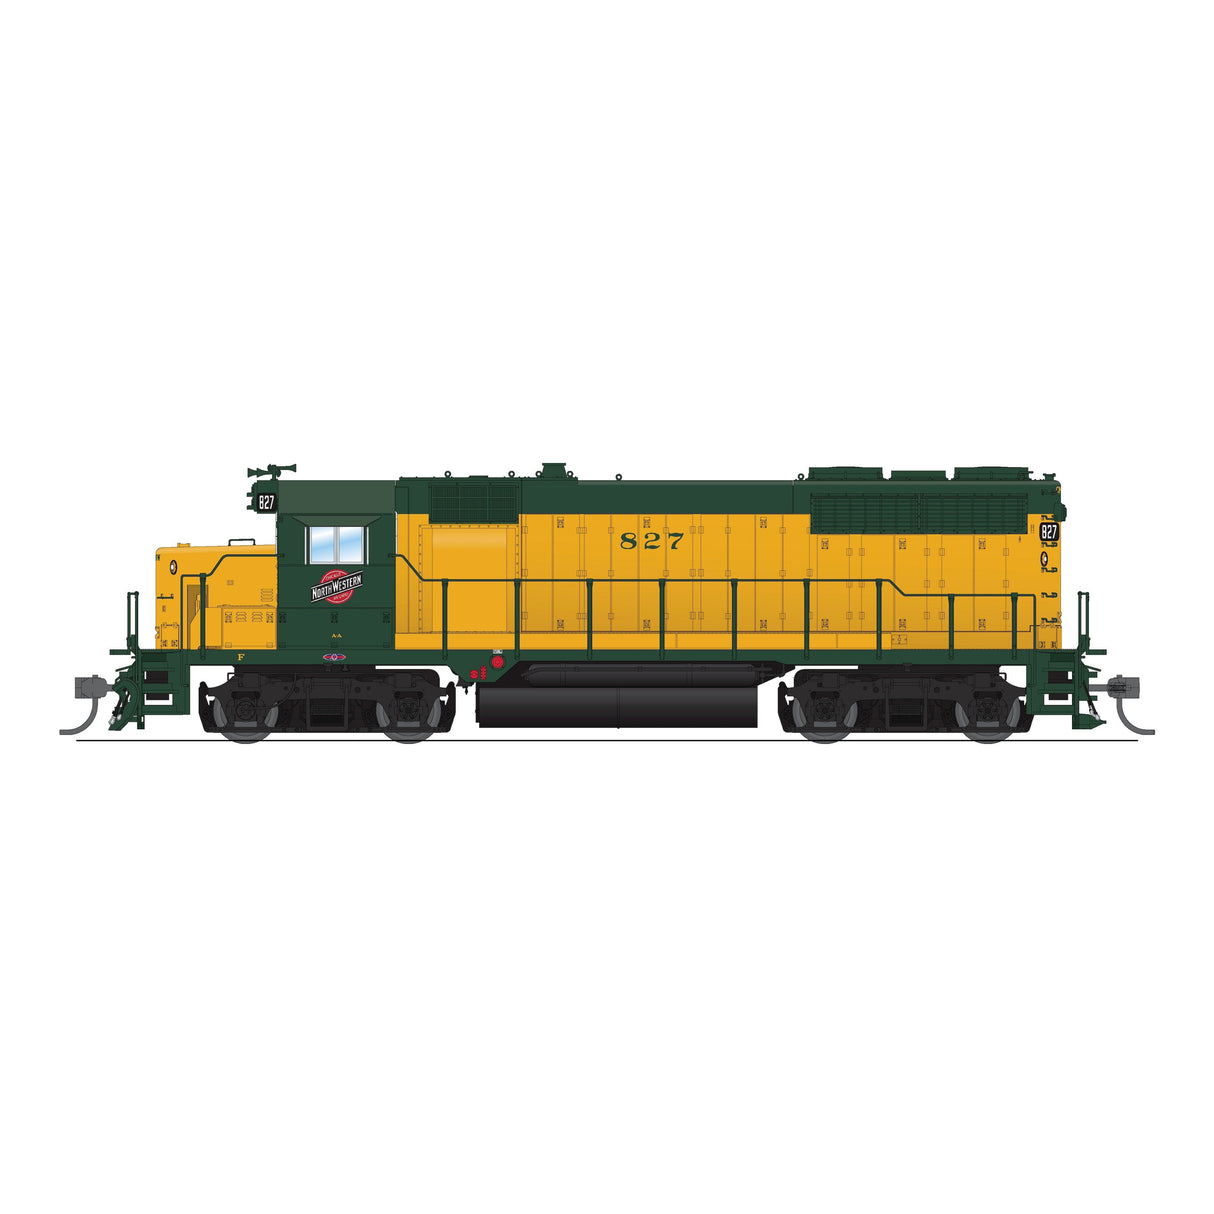 Broadway Limited HO Scale EMD GP35 CNW 833 Green & Yellow Paragon4 Sound/DC/DCC HO